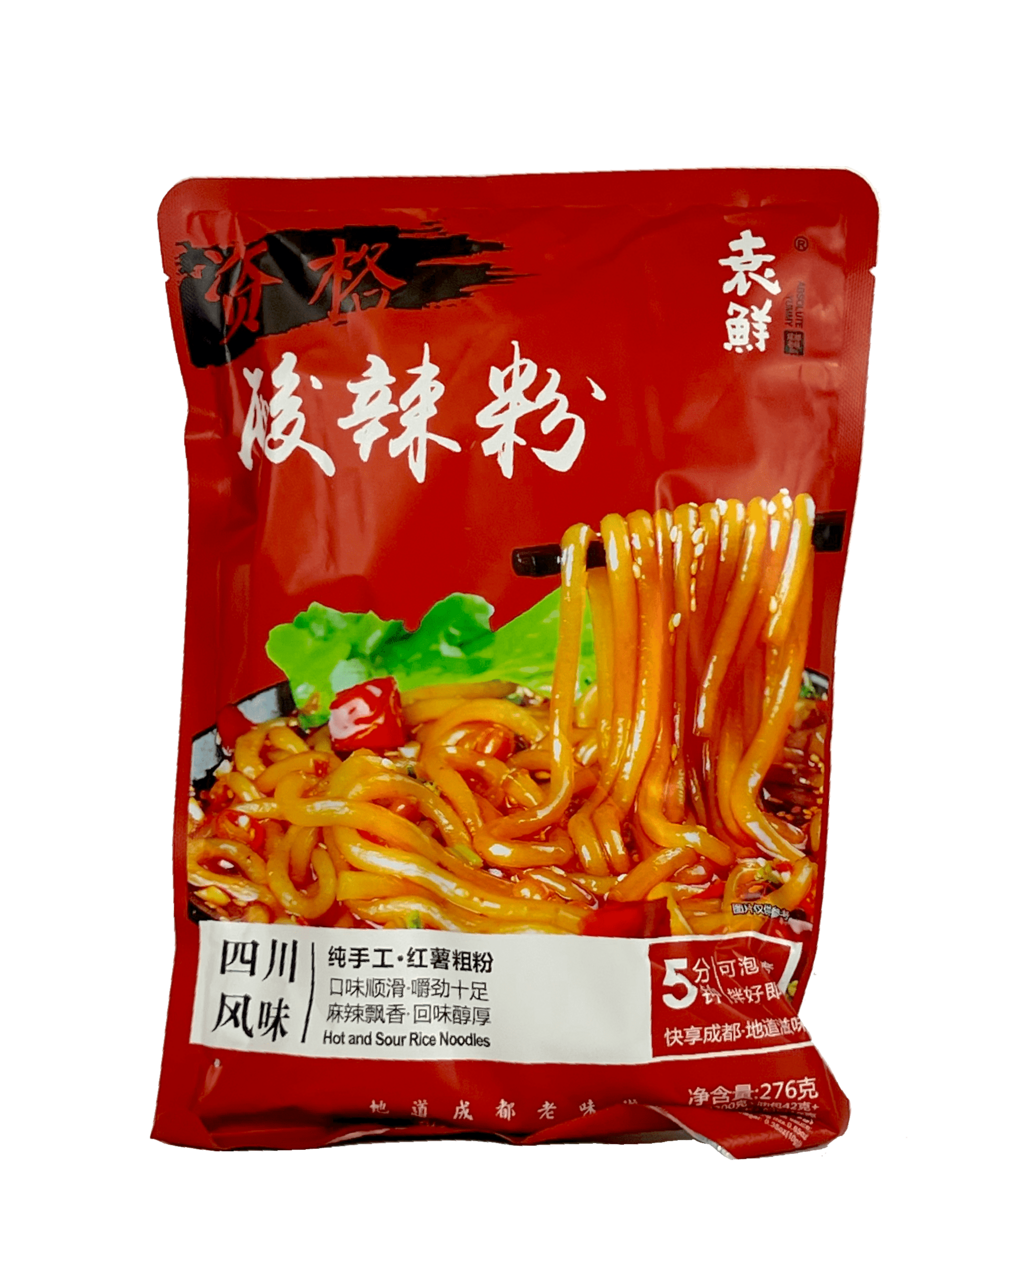 Sweet Potato Noodles With Spicy/Sour Flavour 276g Yuan Xian China